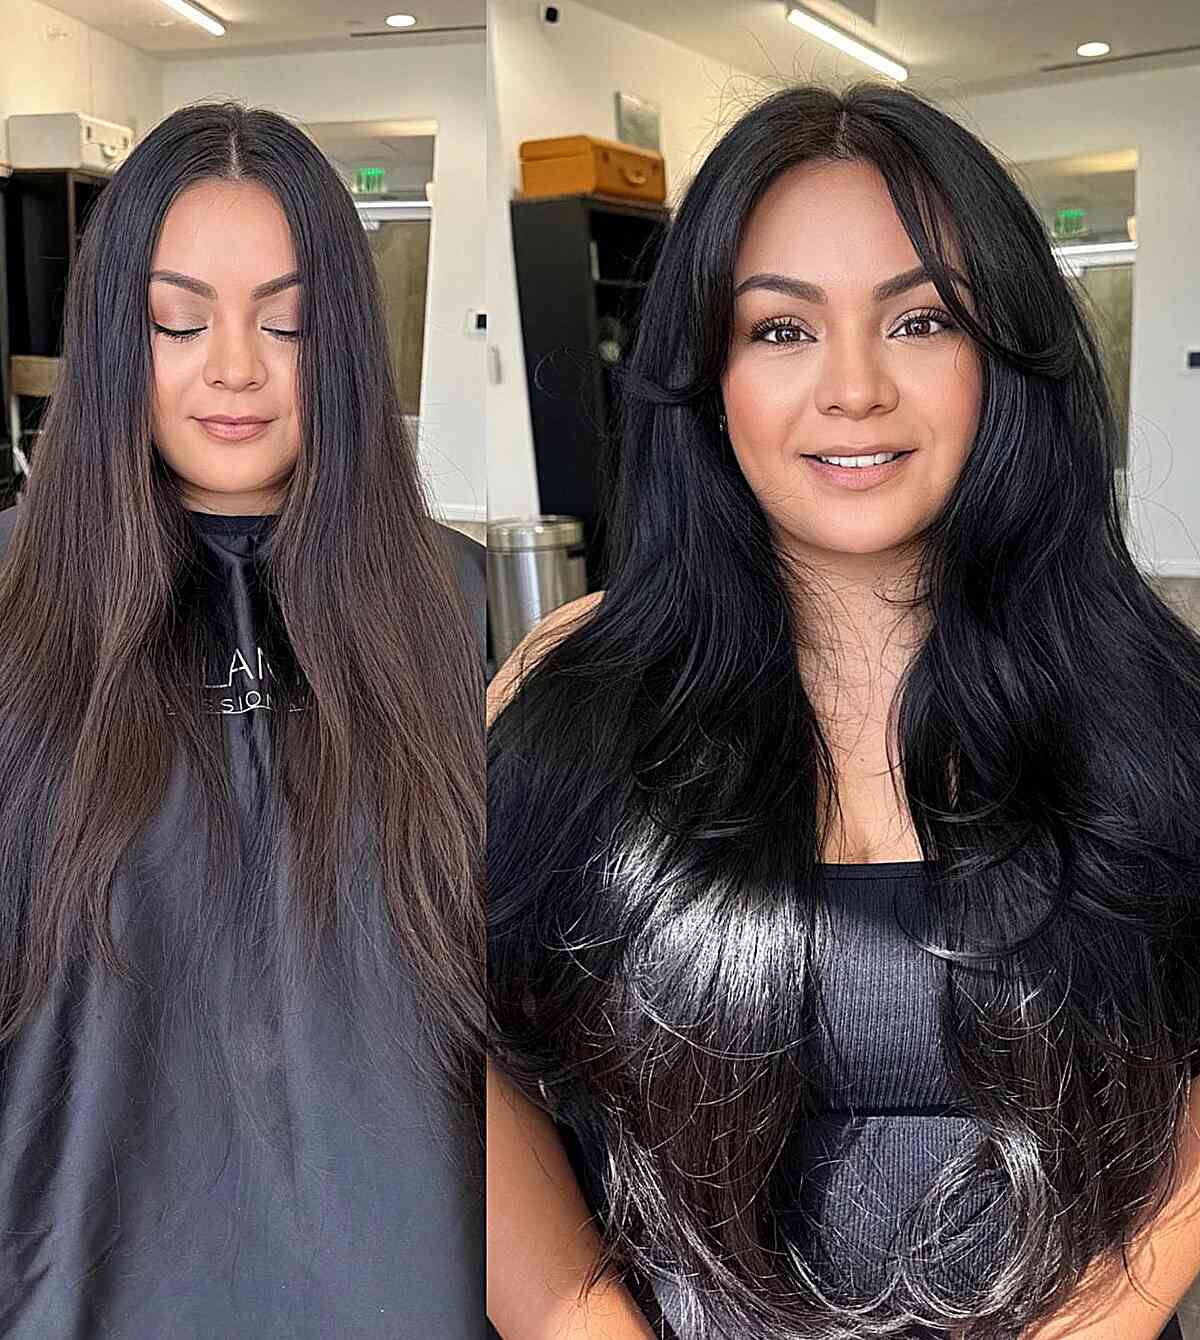 Waist-Length Layered Hair with Middle Part for Round Full Faces